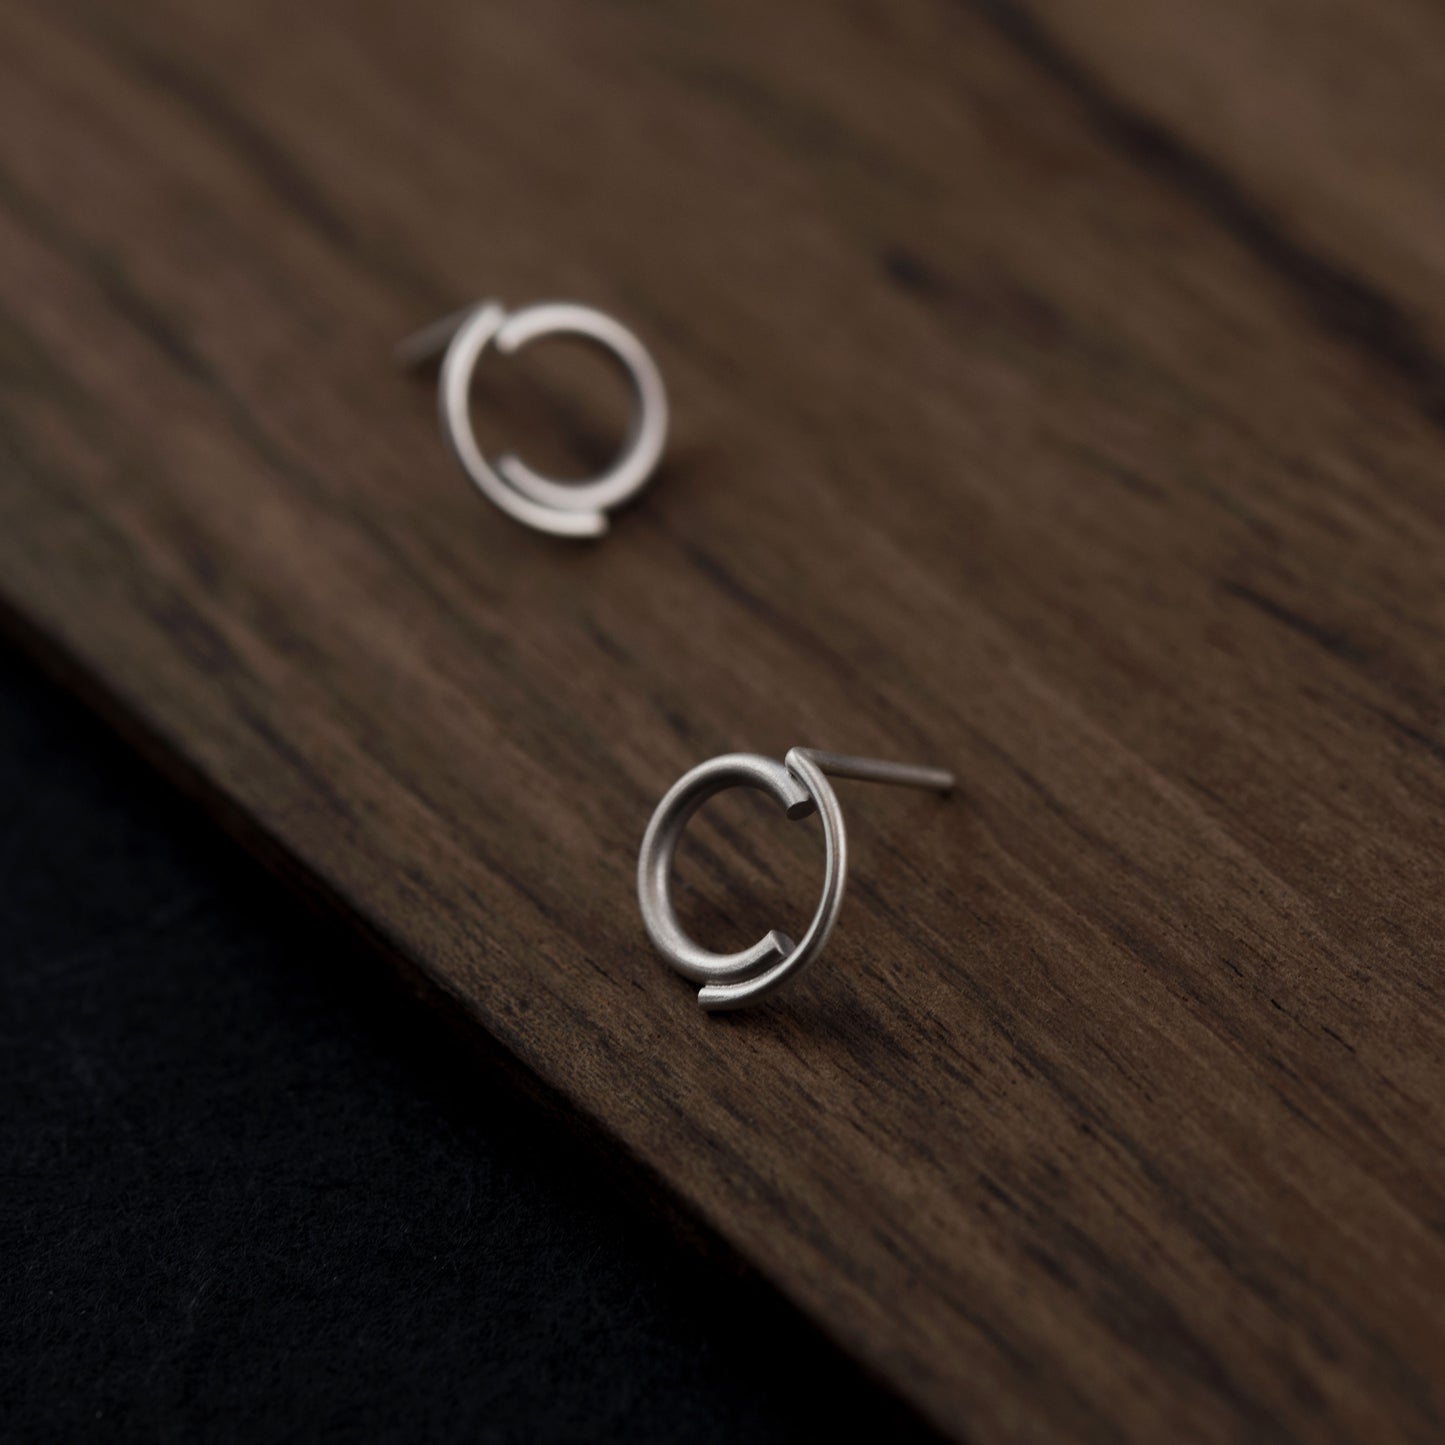 A close up of a concentric circle minimalist silver studs matte finished with a dark wood background